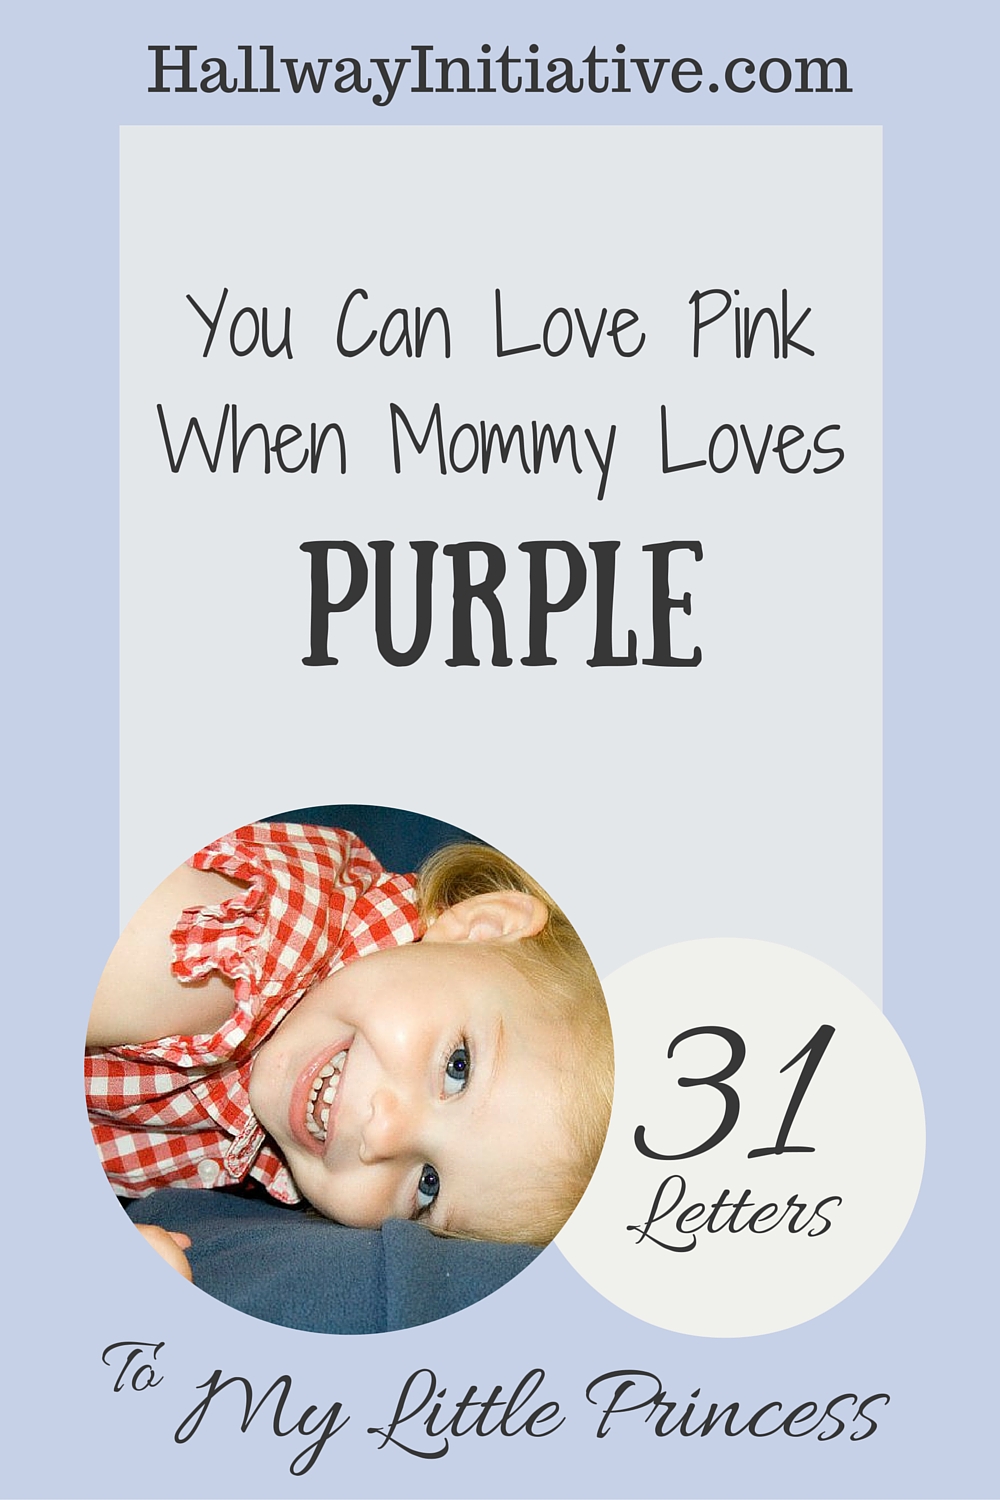 You can love pink when mommy loves purple